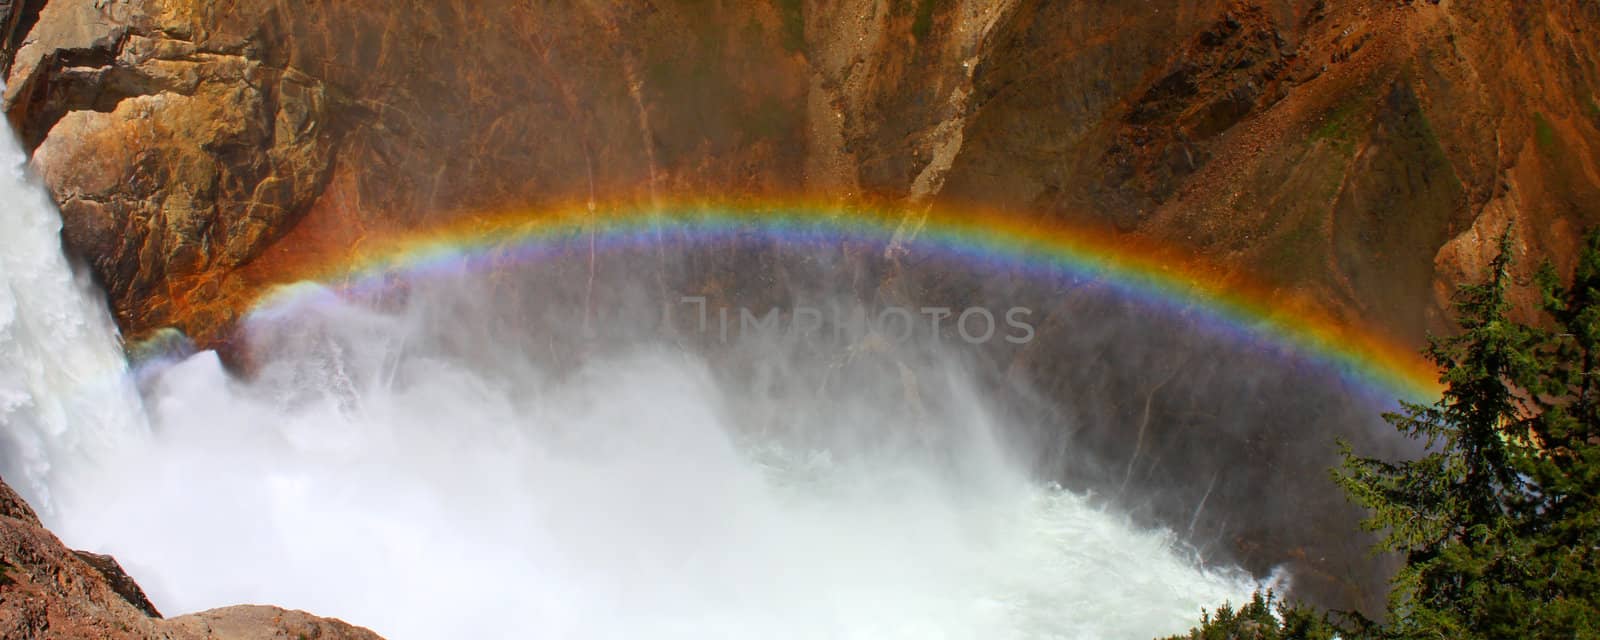 Rainbow at Lower Falls - Yellowstone by Wirepec